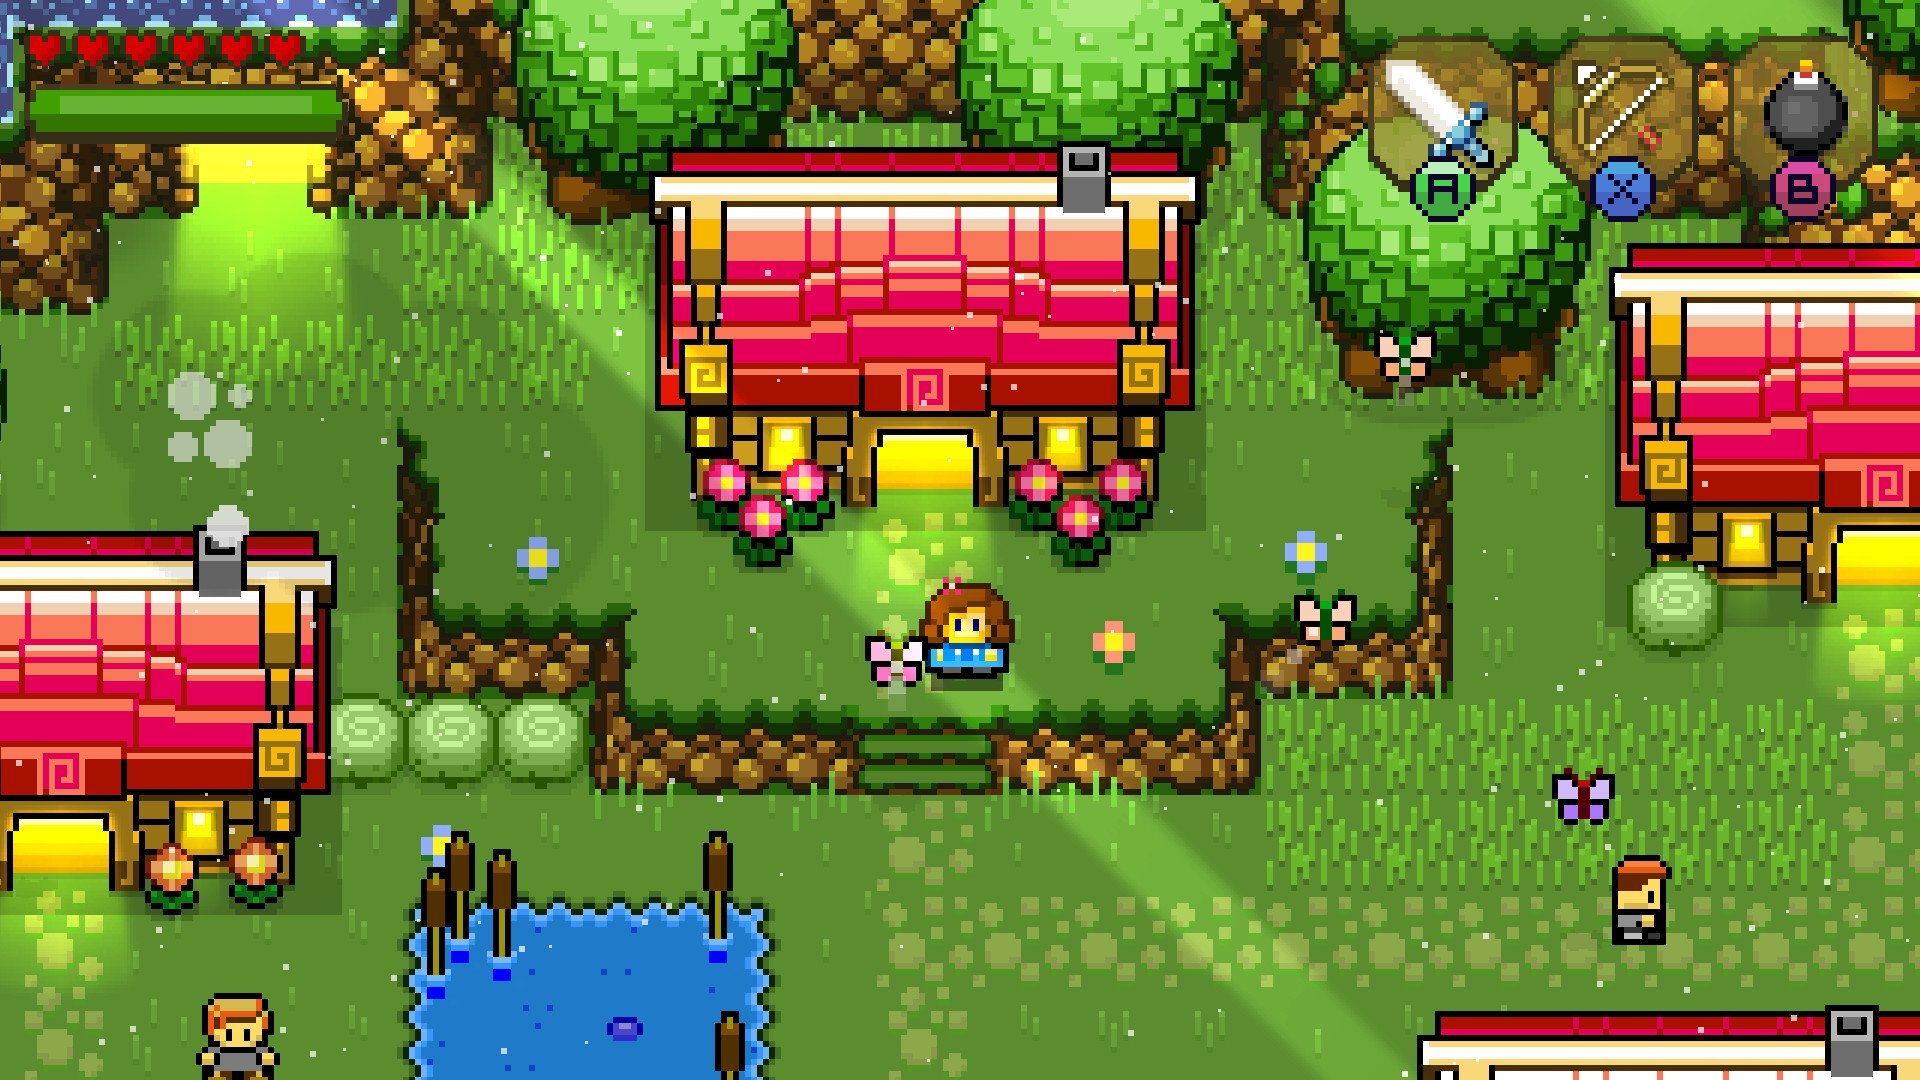 Blossom Tales: The Sleeping King Review